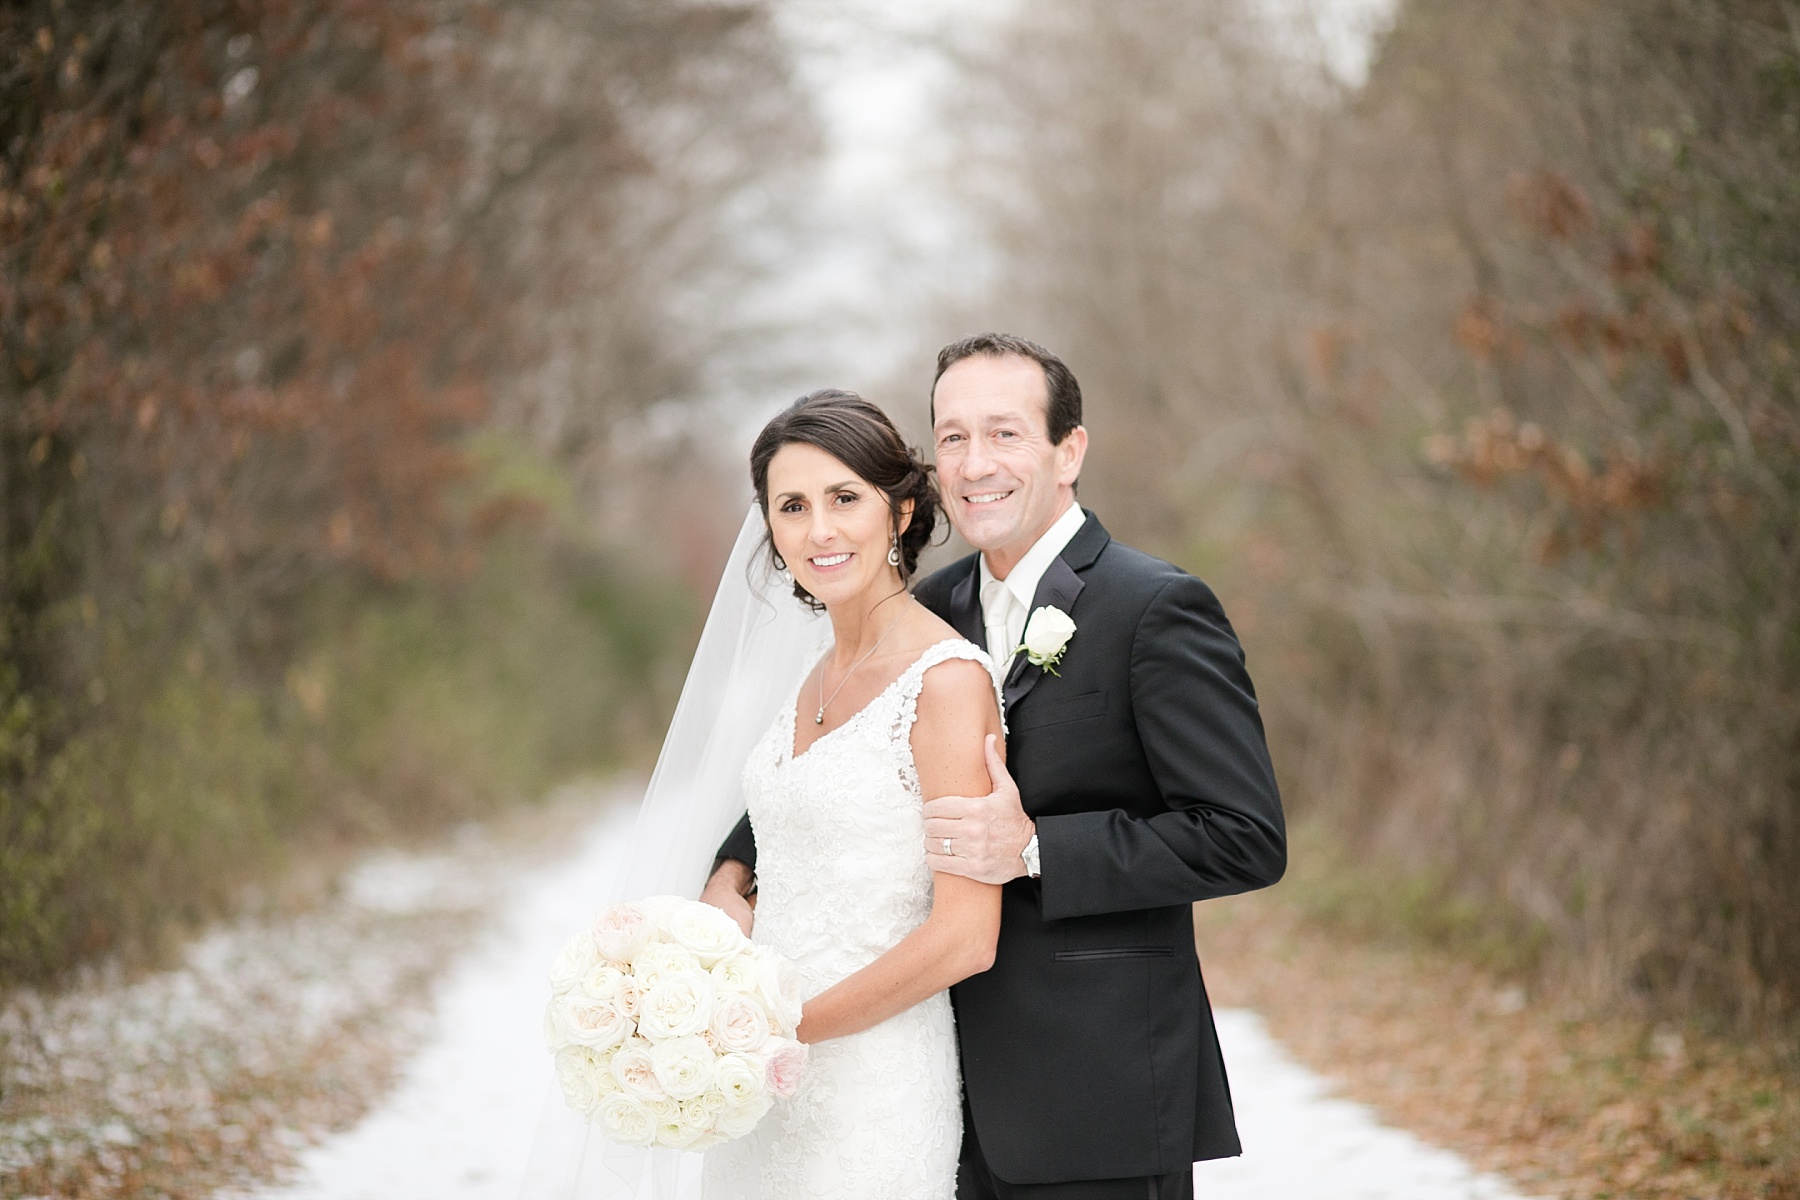 Kelly & Bob woke up to a light dusting of snow for their wedding at The Condensery wedding in Osseo, WI